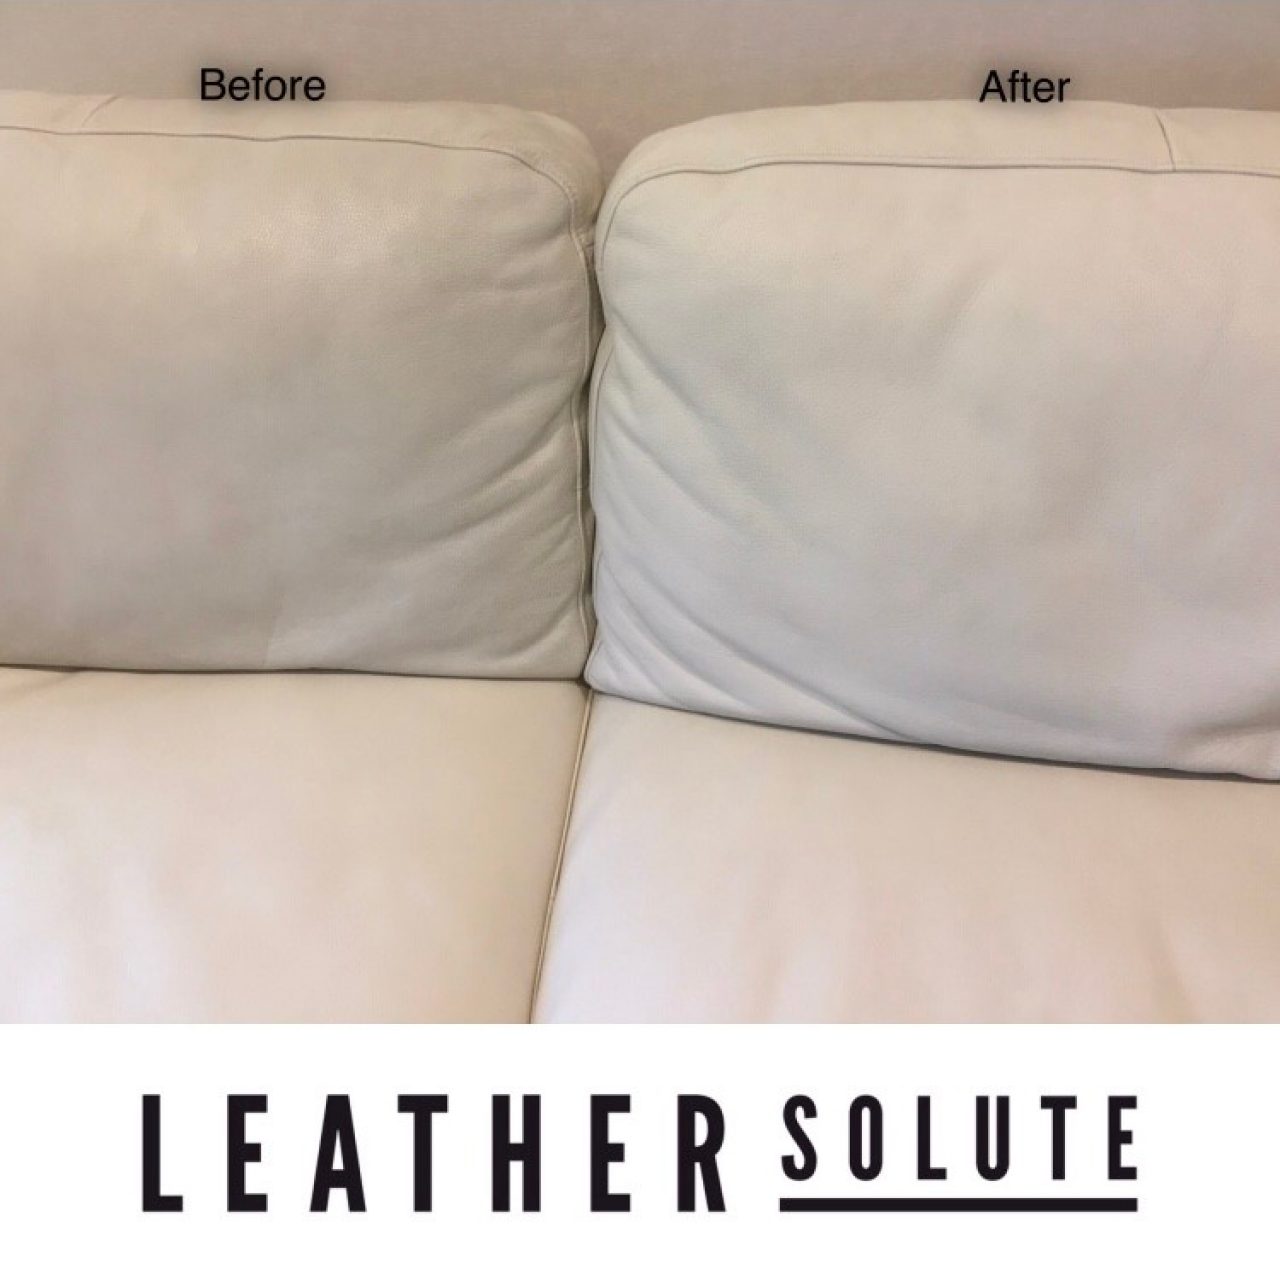 https://leathersolute.co.th/wp-content/uploads/2018/12/Cleaning-furniture_๑๘๑๒๓๐_0003-1280x1280.jpg